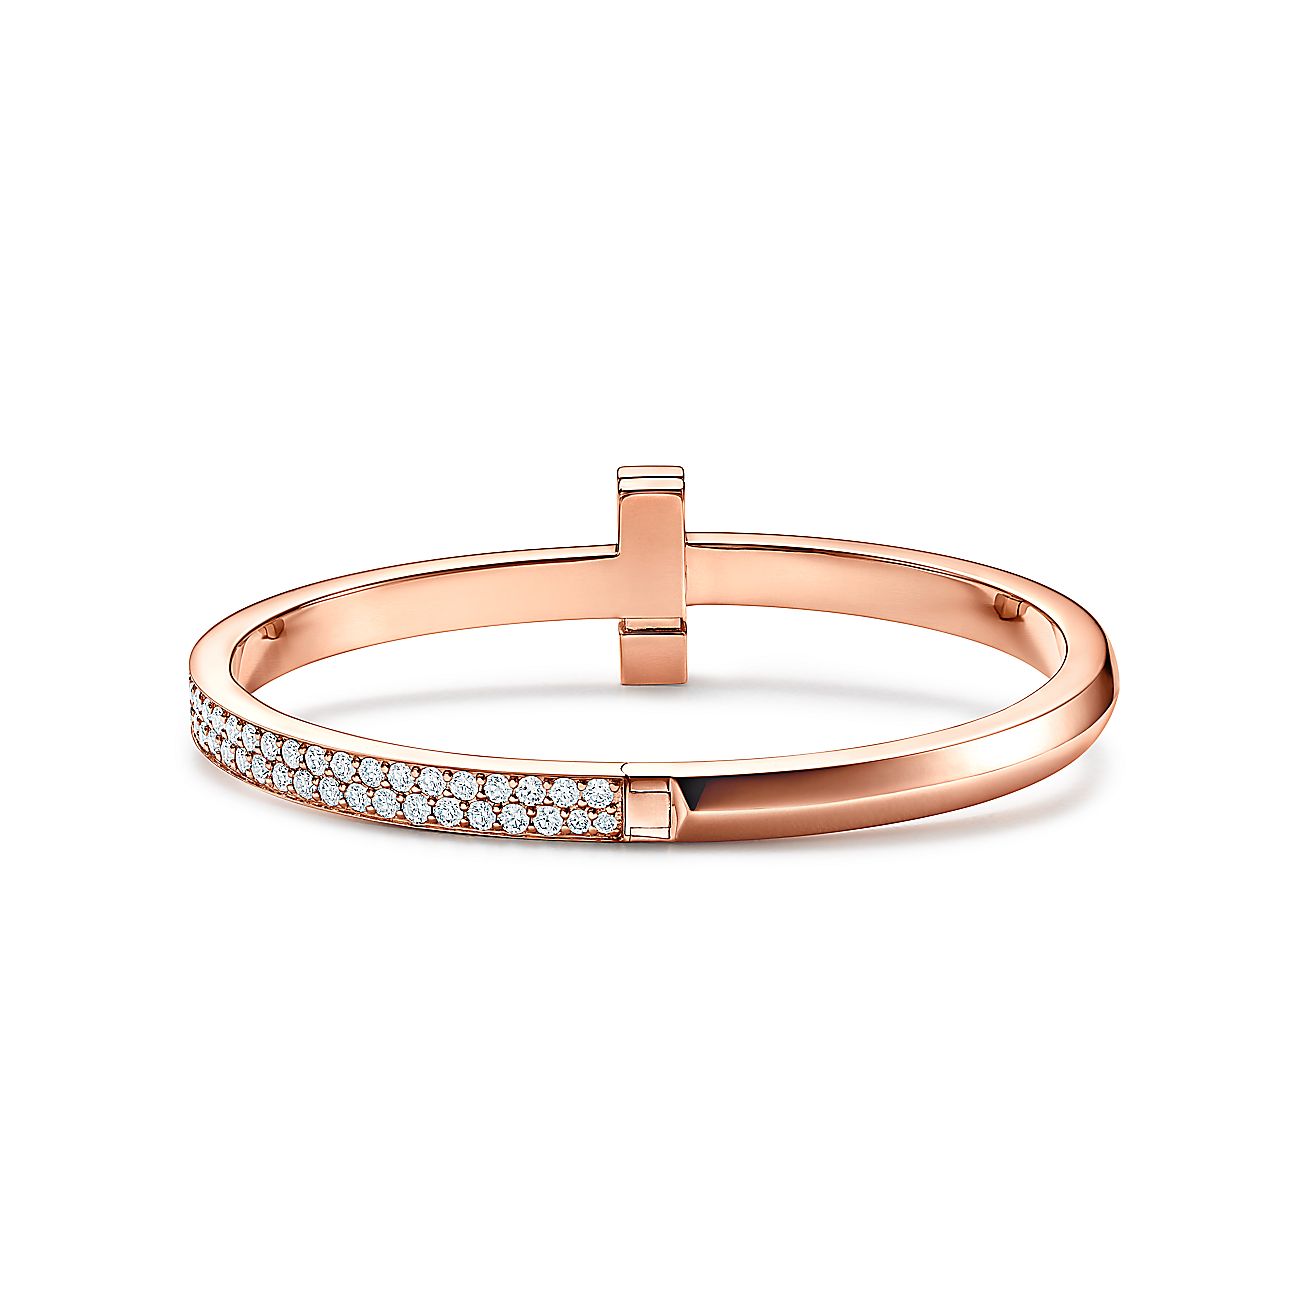 Tiffany & Co. “T” Gold Diamond Hinged Wire Bangle in 18k Rose Gold